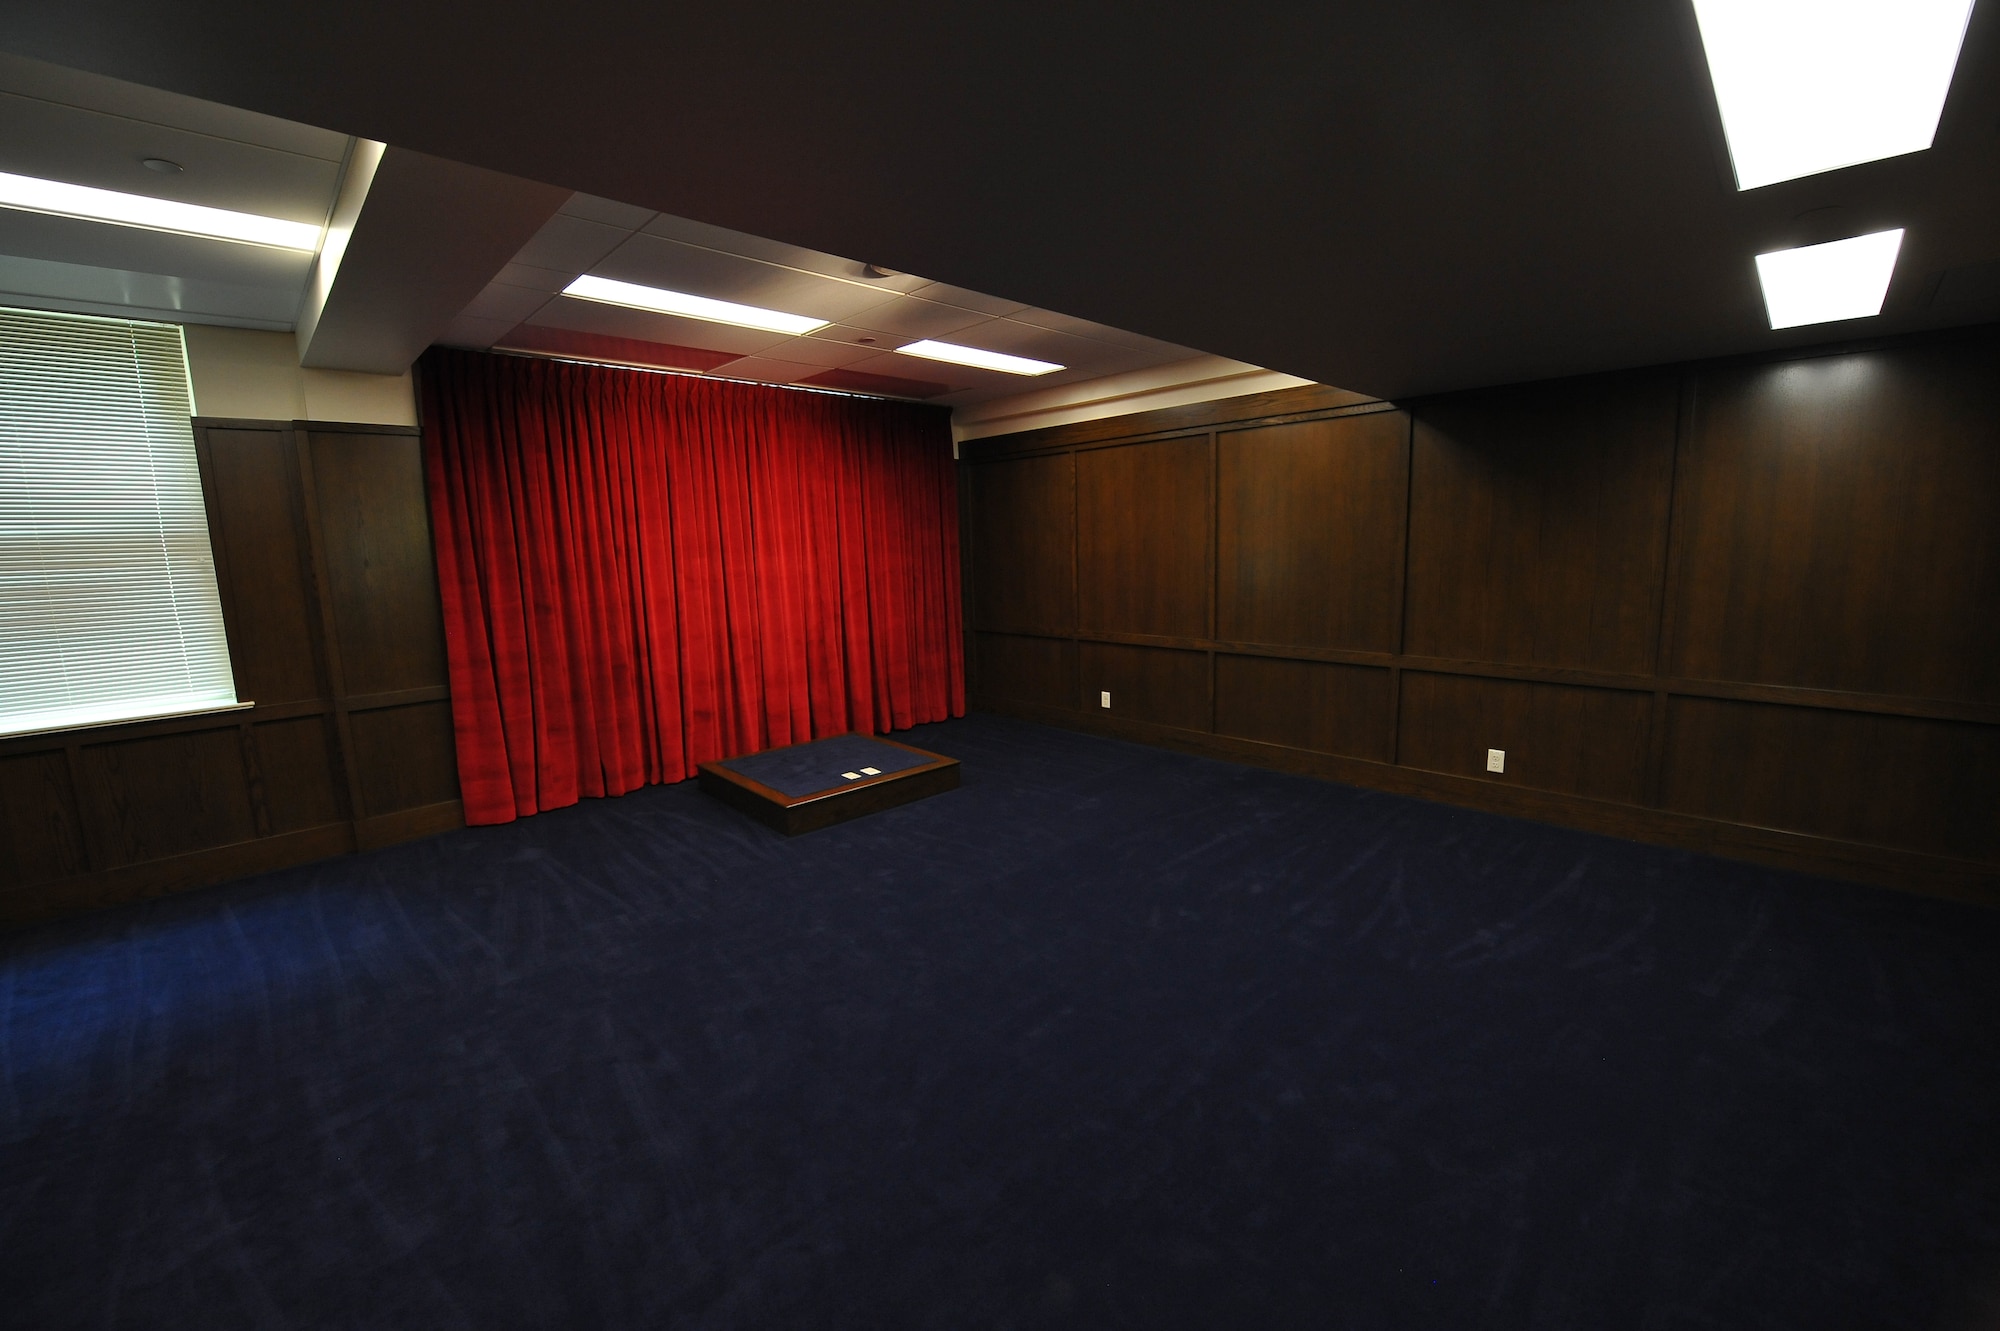 A ceremonial room where service members recite the Oath of Enlistment lies empty during the transition to the newly renovated Military Entrance Processing Station Aug. 1, 2014, at the Denver Federal Center in Denver, Colo. The transition will enhance the staff's ability to provide efficient  service to more than 200 applicants a day. (U.S. Air Force photo by Senior Airman Phillip Houk/Released)